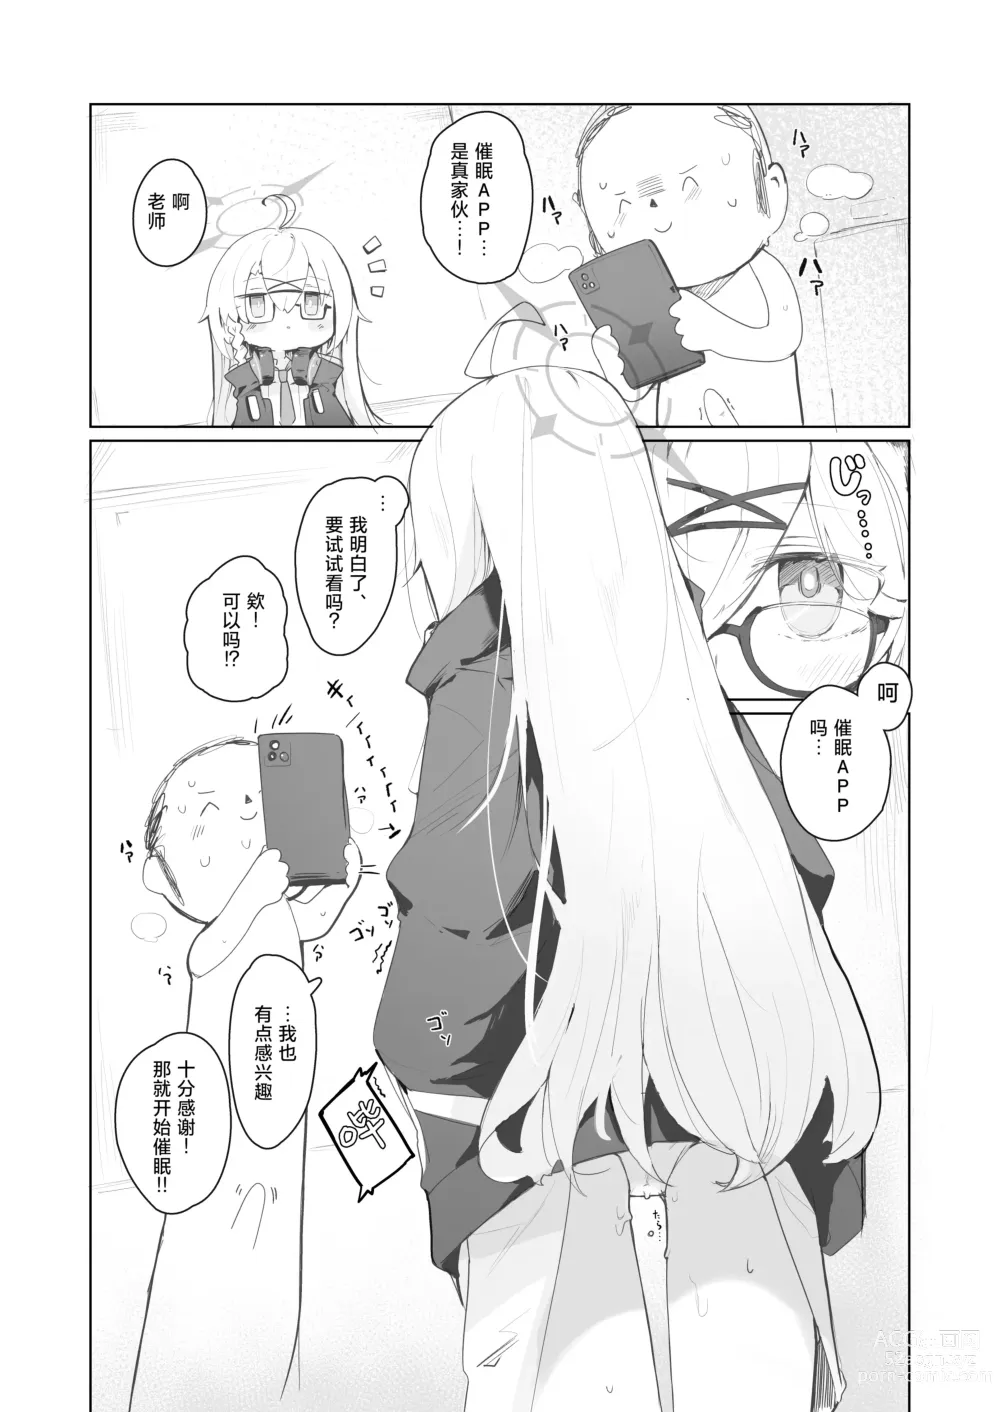 Page 7 of doujinshi 真理部催眠本